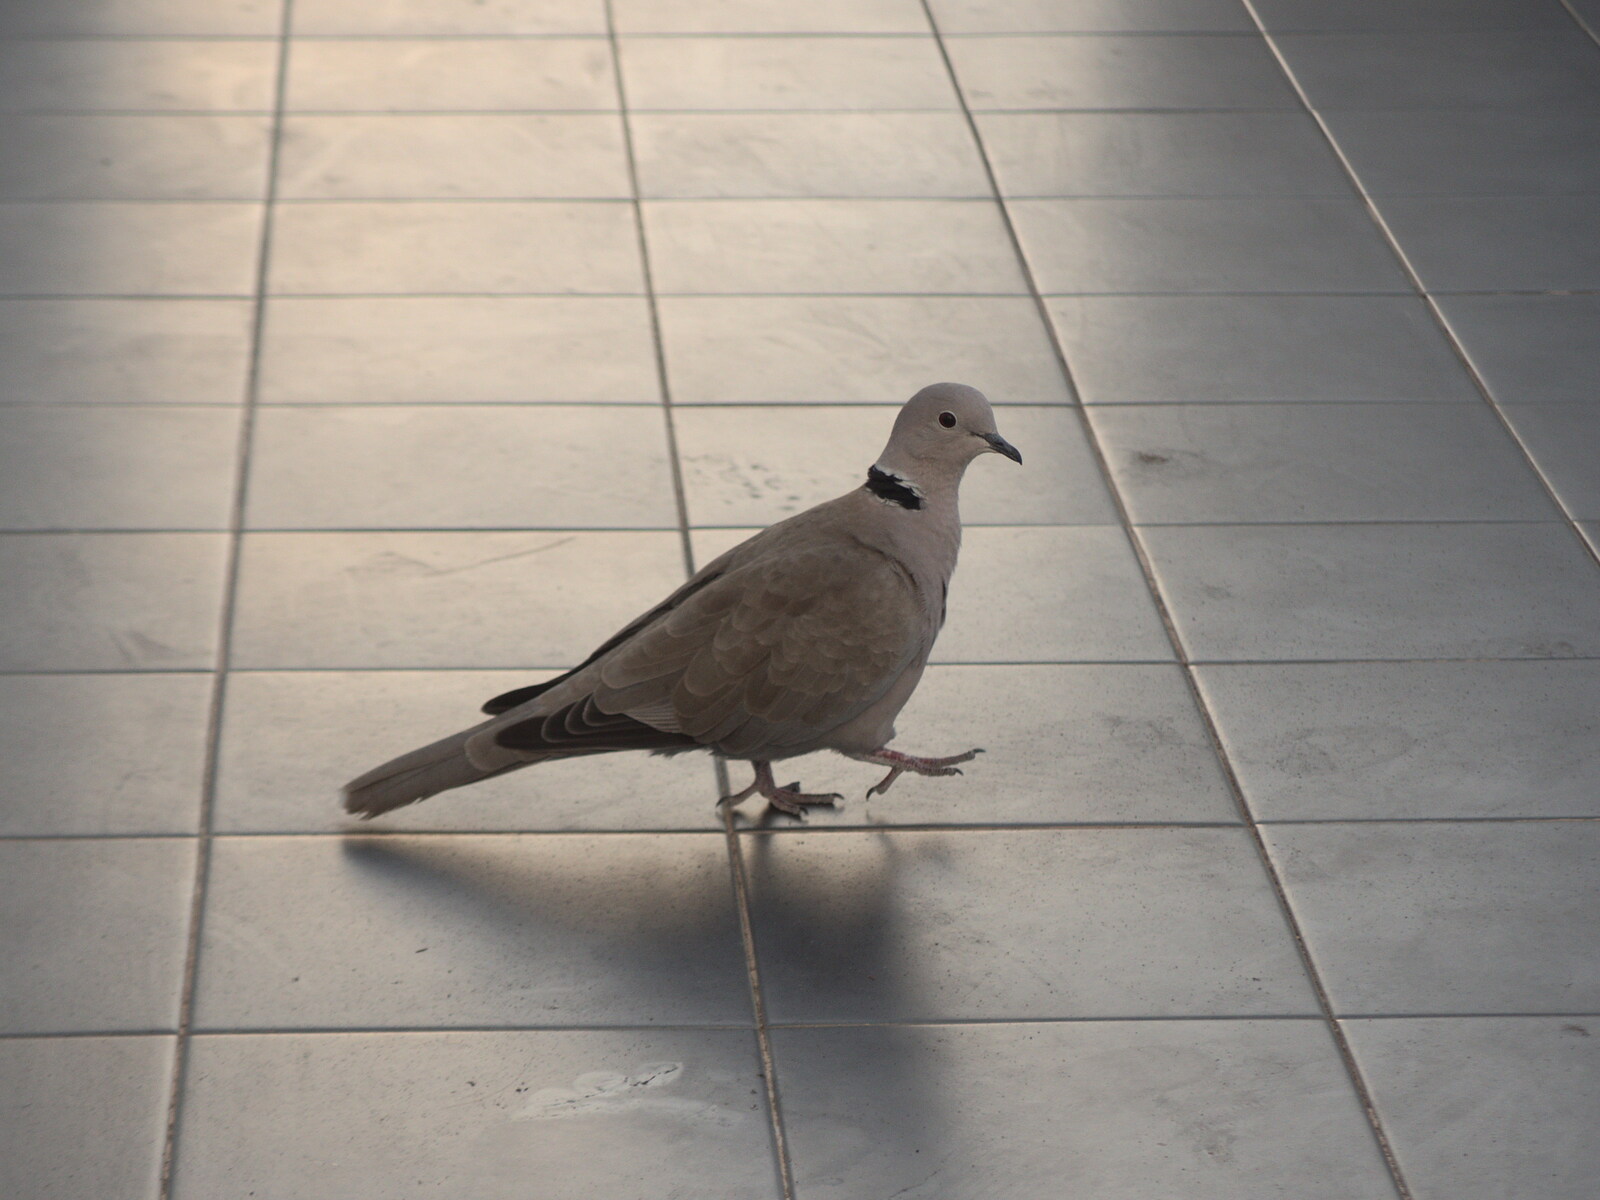 A collared dove trots around from The Volcanoes of Lanzarote, Canary Islands, Spain - 27th October 2021